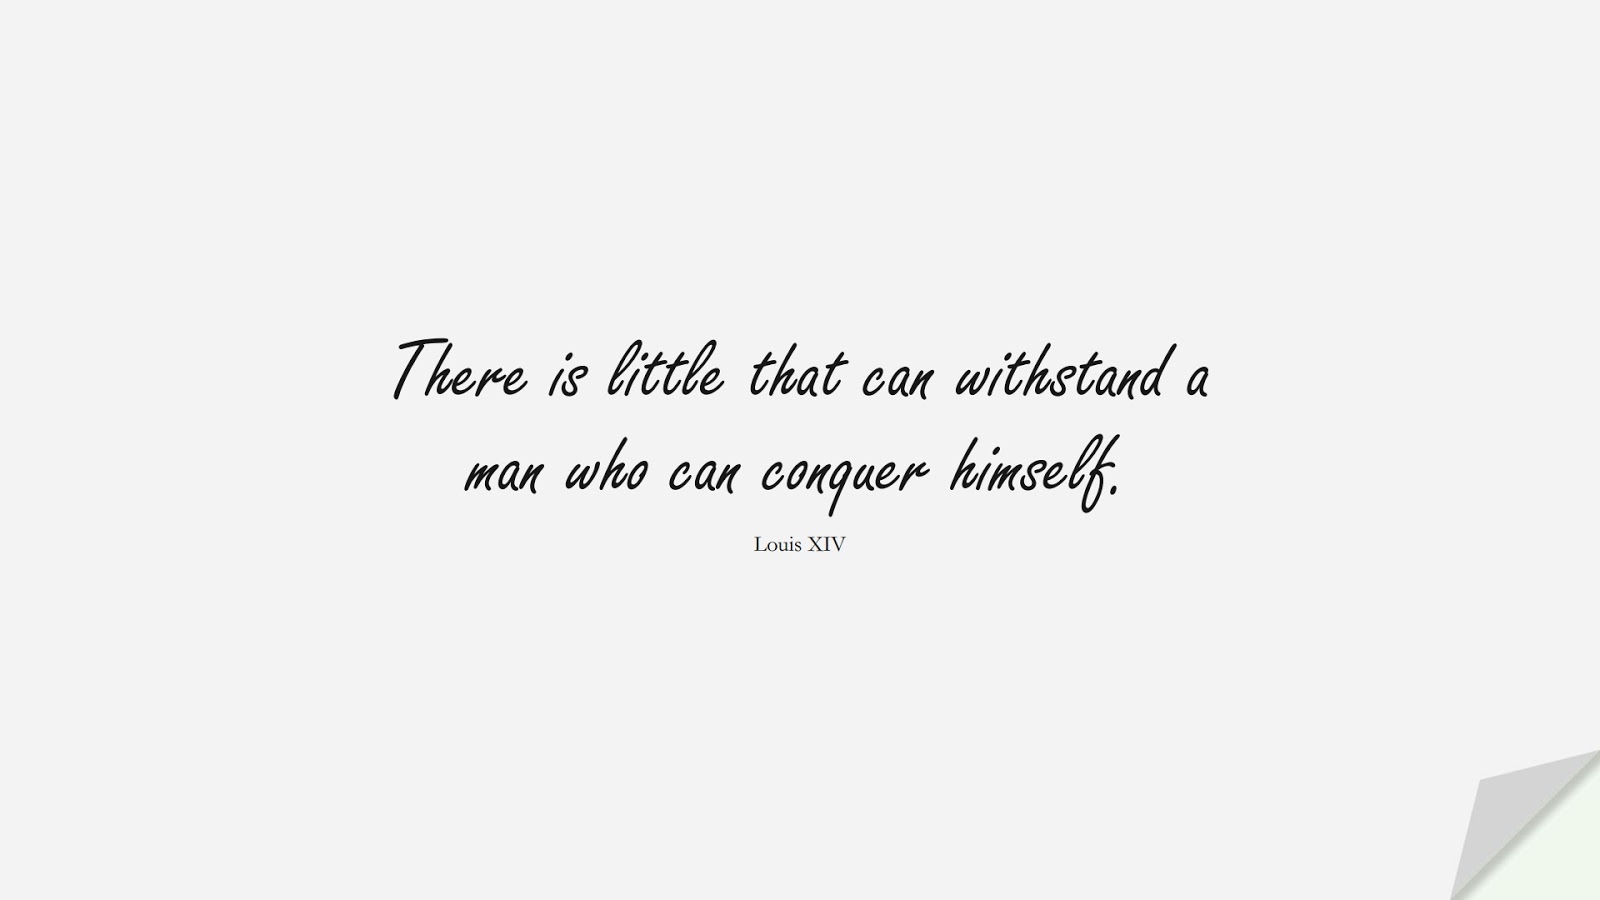 There is little that can withstand a man who can conquer himself. (Louis XIV);  #NeverGiveUpQuotes